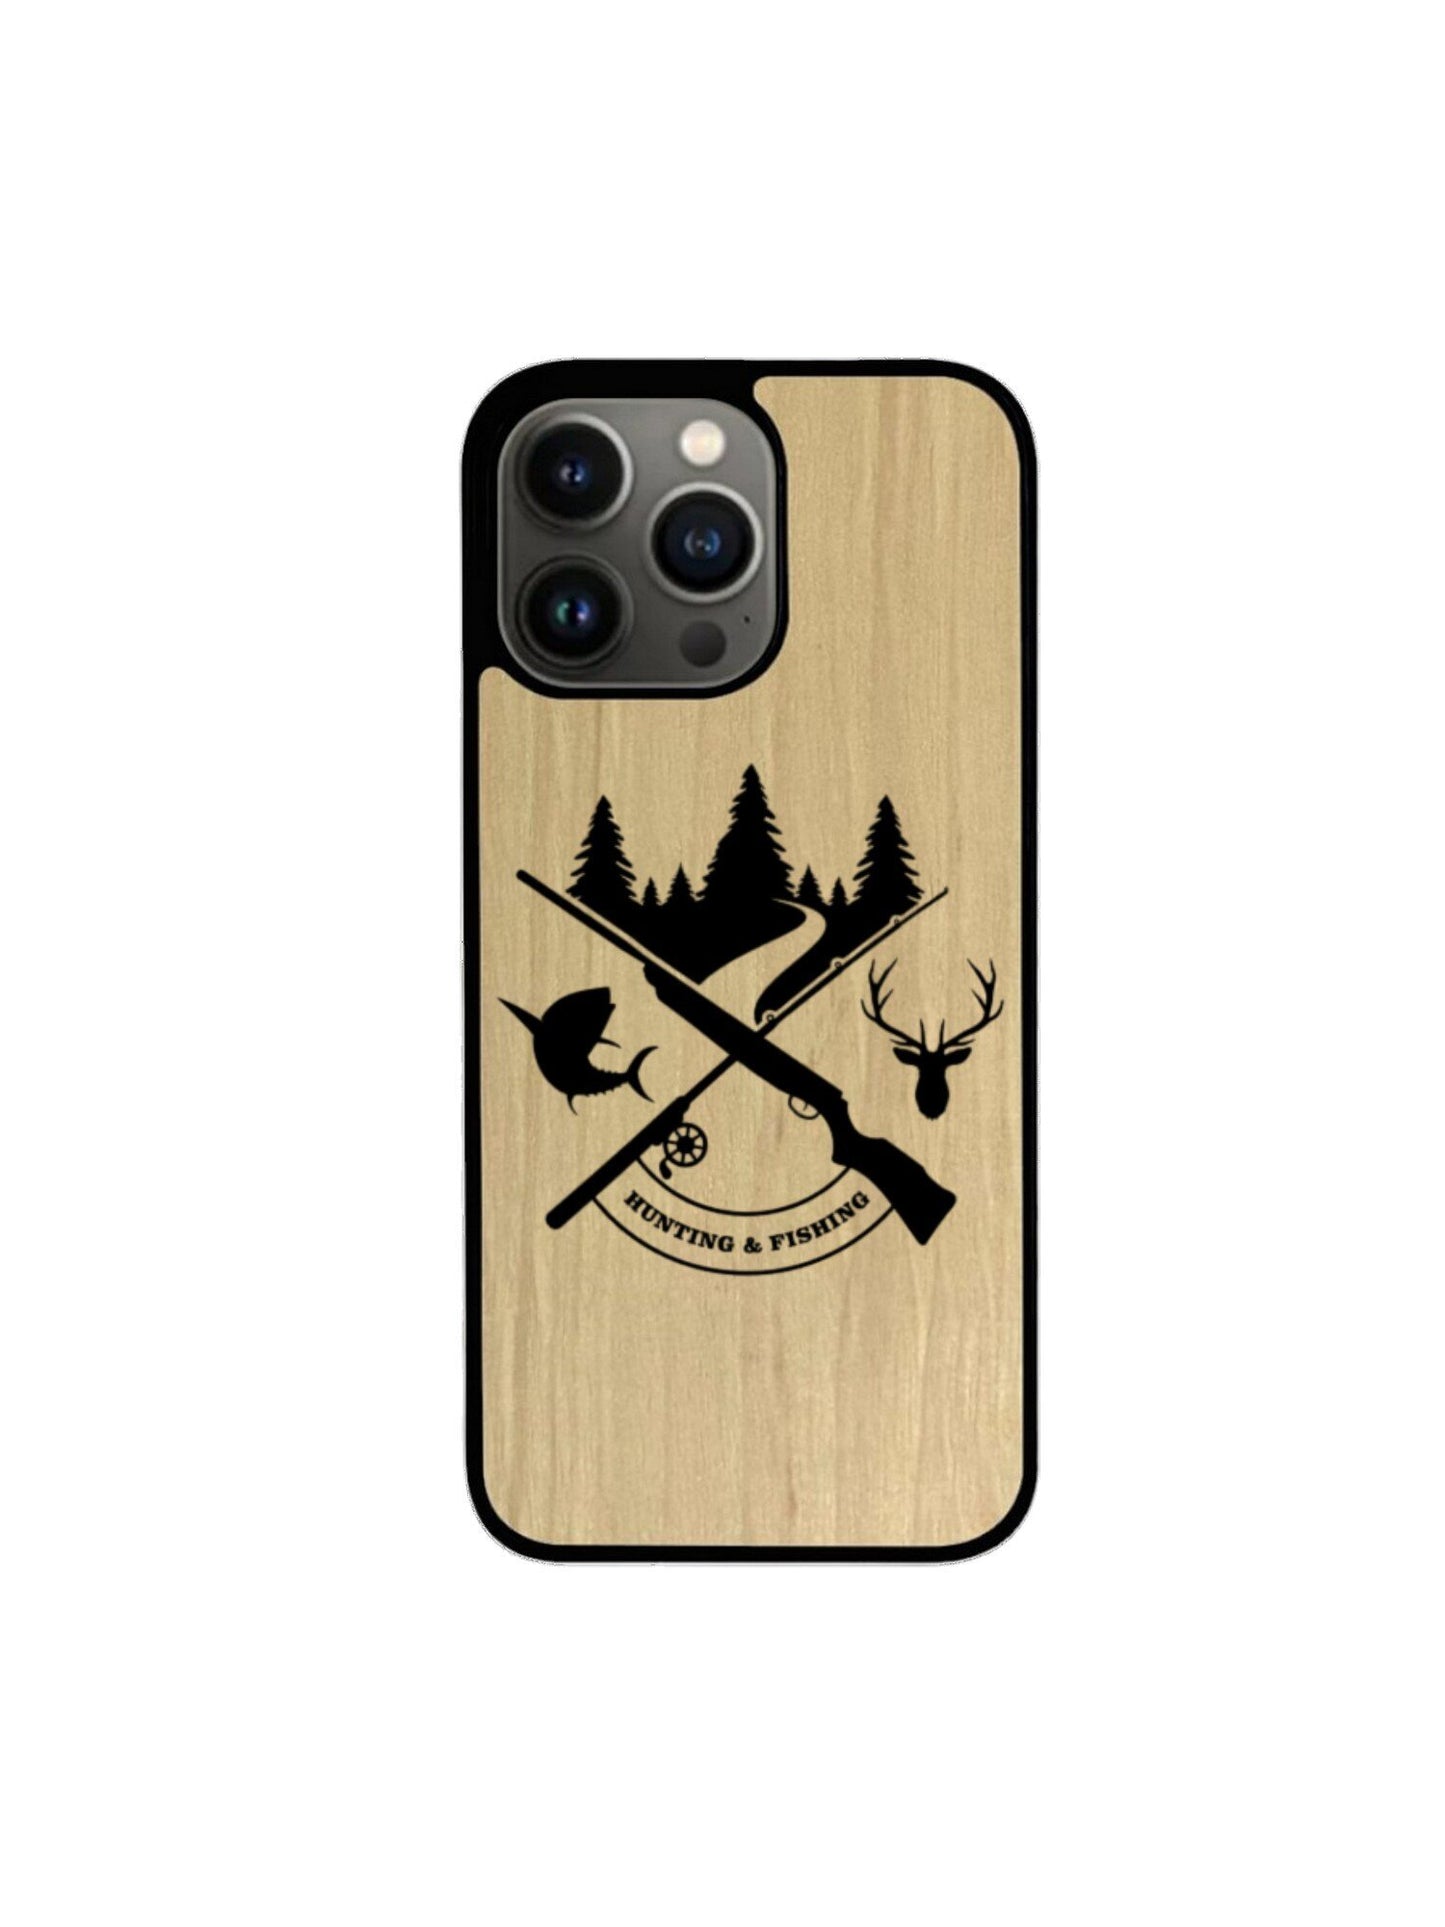 Coque Iphone - Chasse et pêche